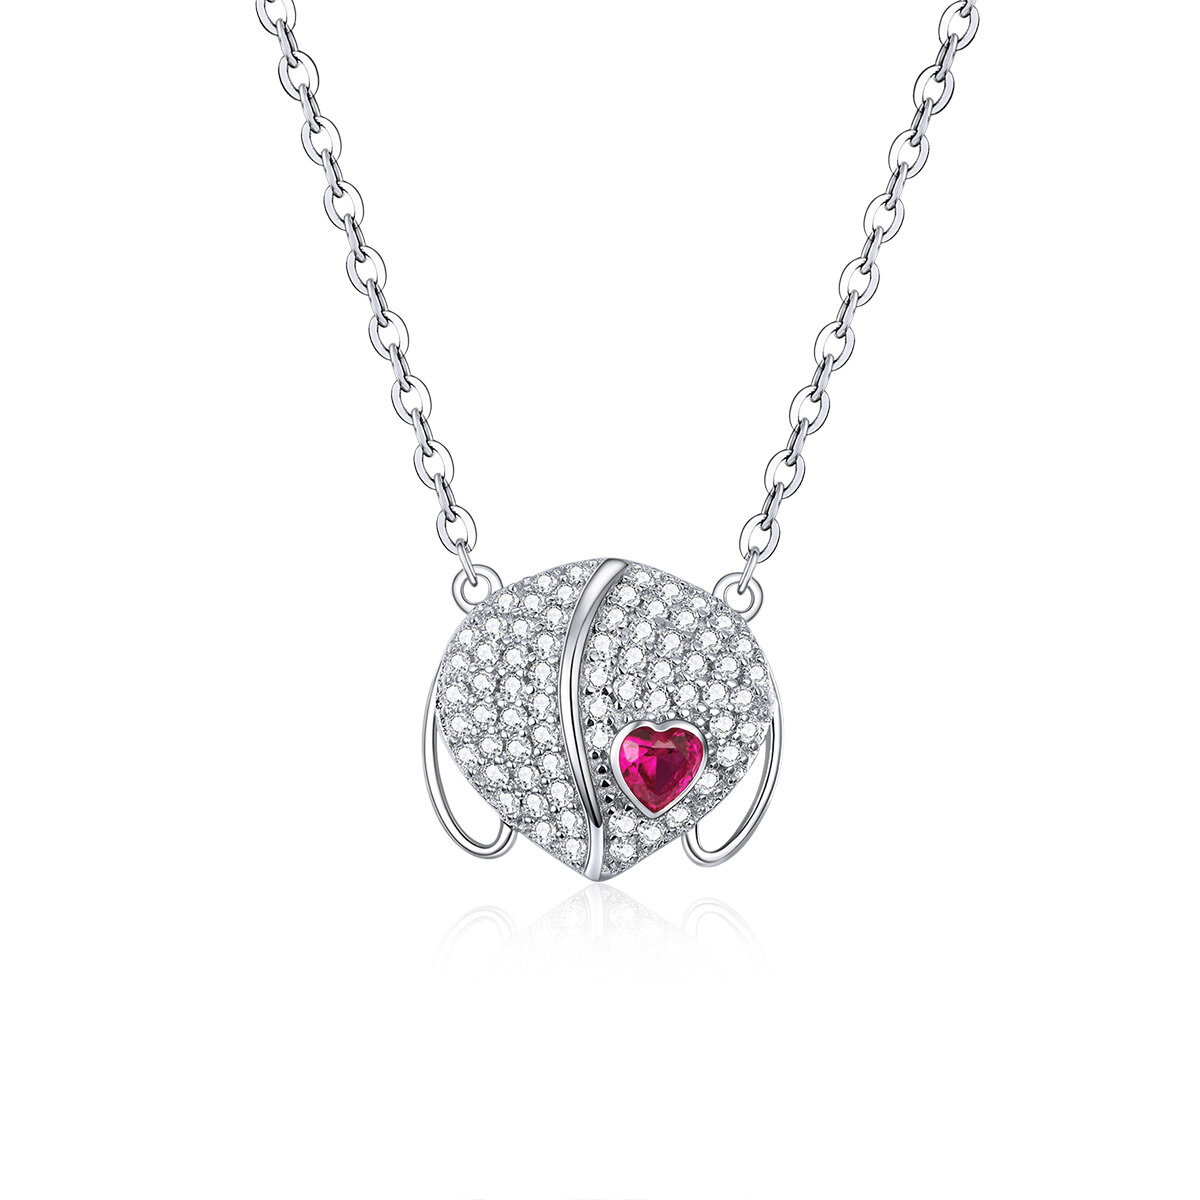 GemKing BSN174 Salute S925 Sterling Silver Necklace